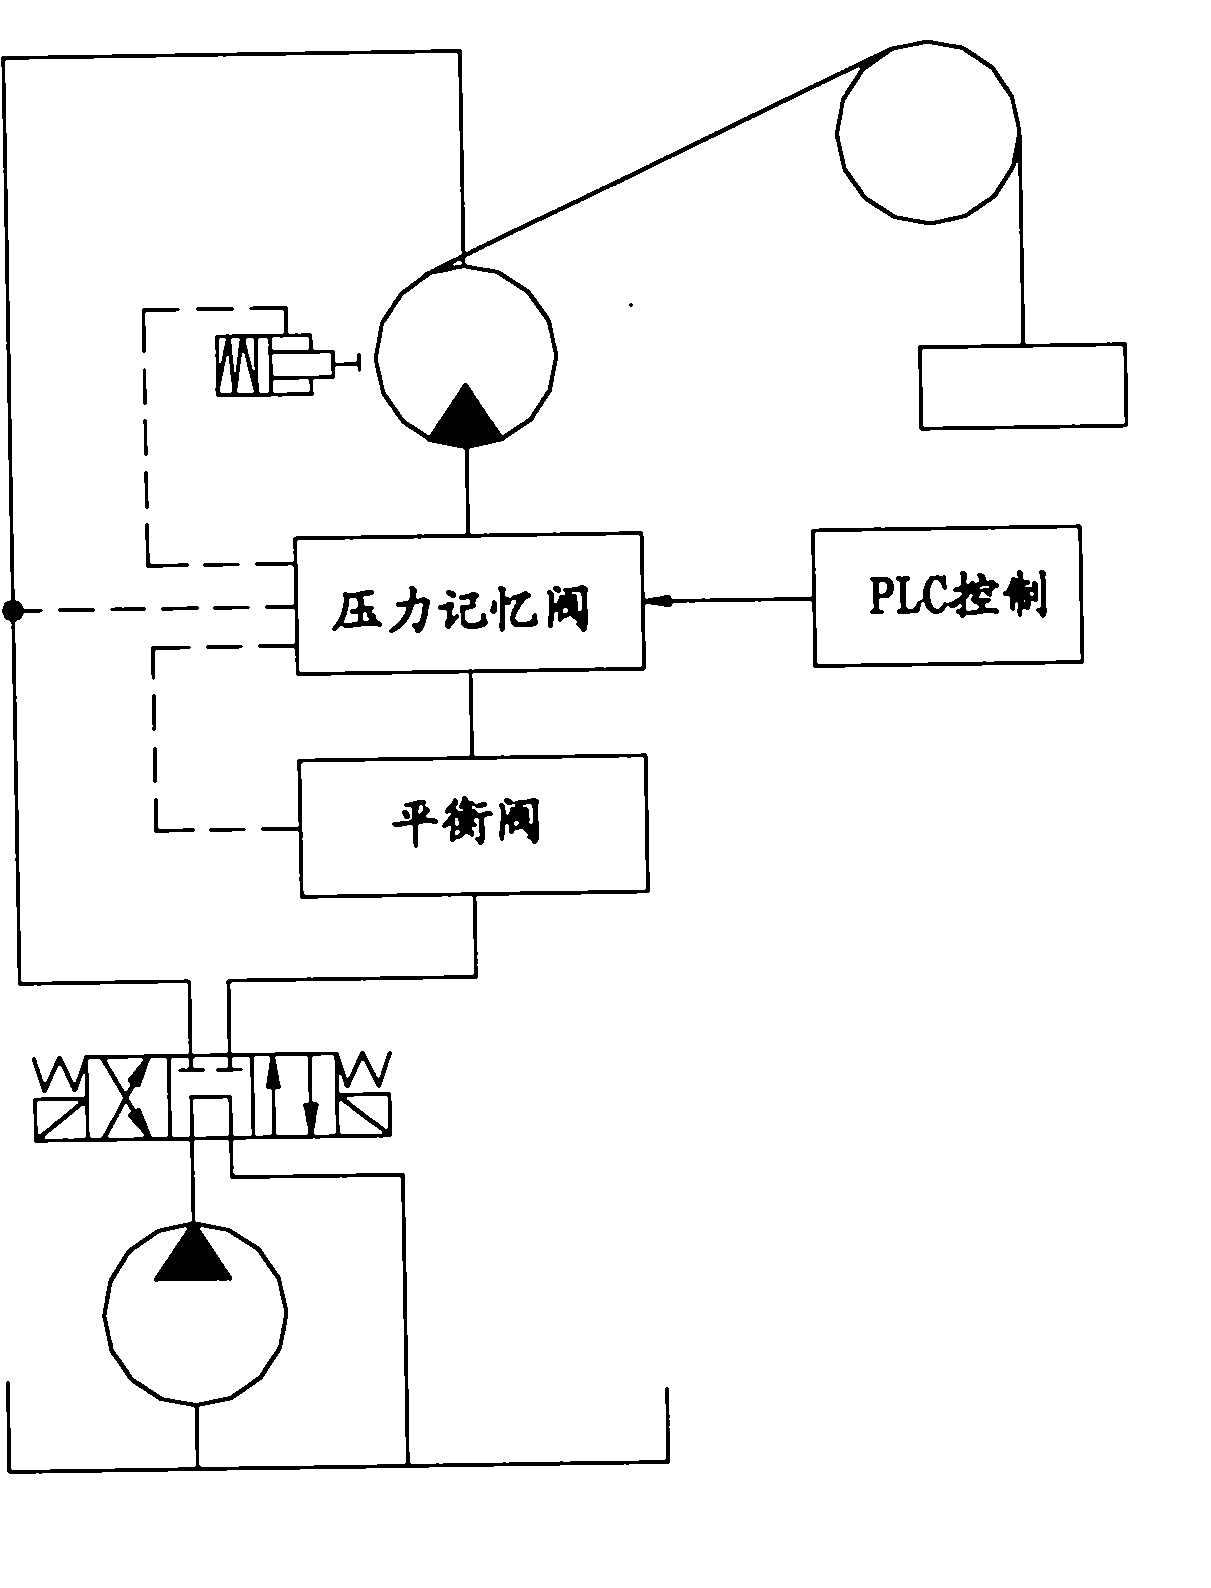 Hydraulic control system of crane and winch device of crane